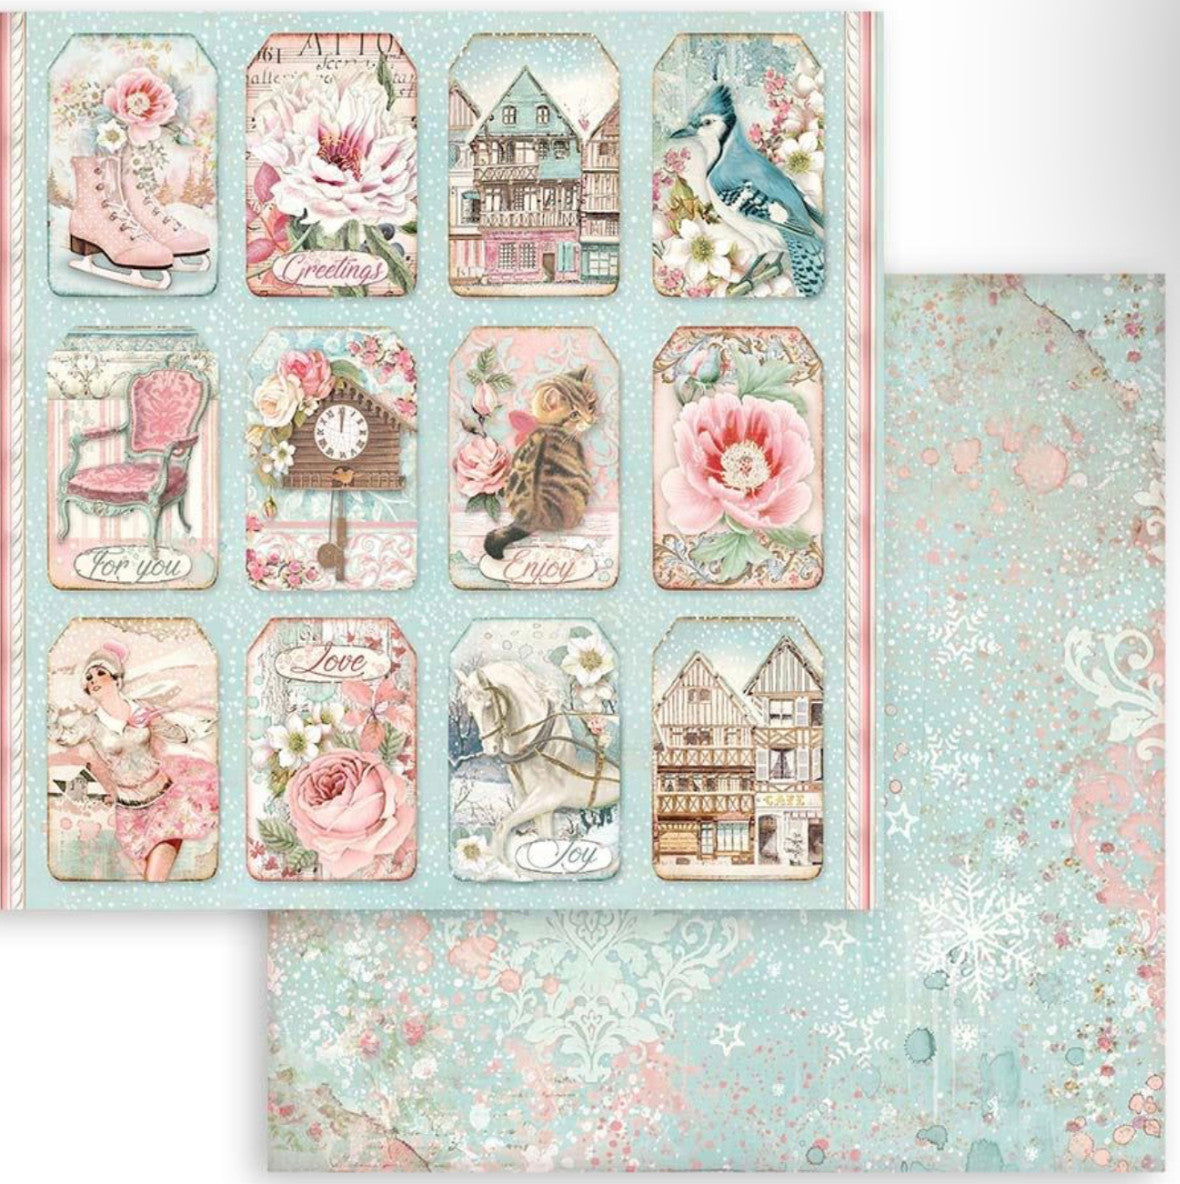 Stamperia - Cozy Winter Double-Sided Paper Pad 12x12 - 5993110024194